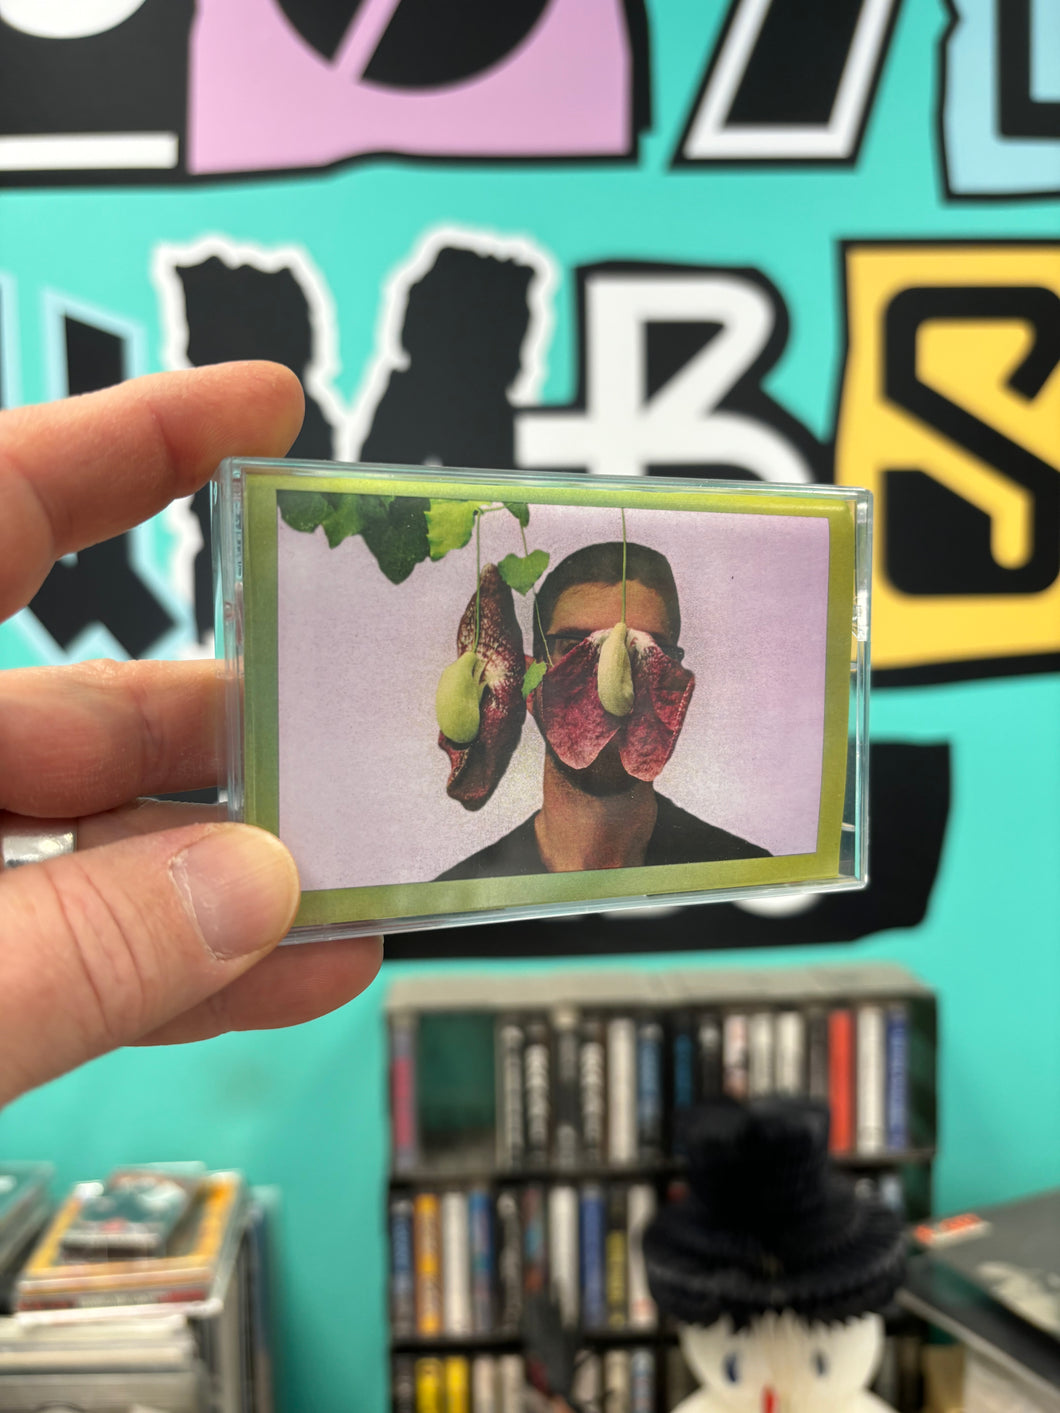 Dumb: Y.O.T.R., C-cassette, Limited Edition, Numbered, Self-Released